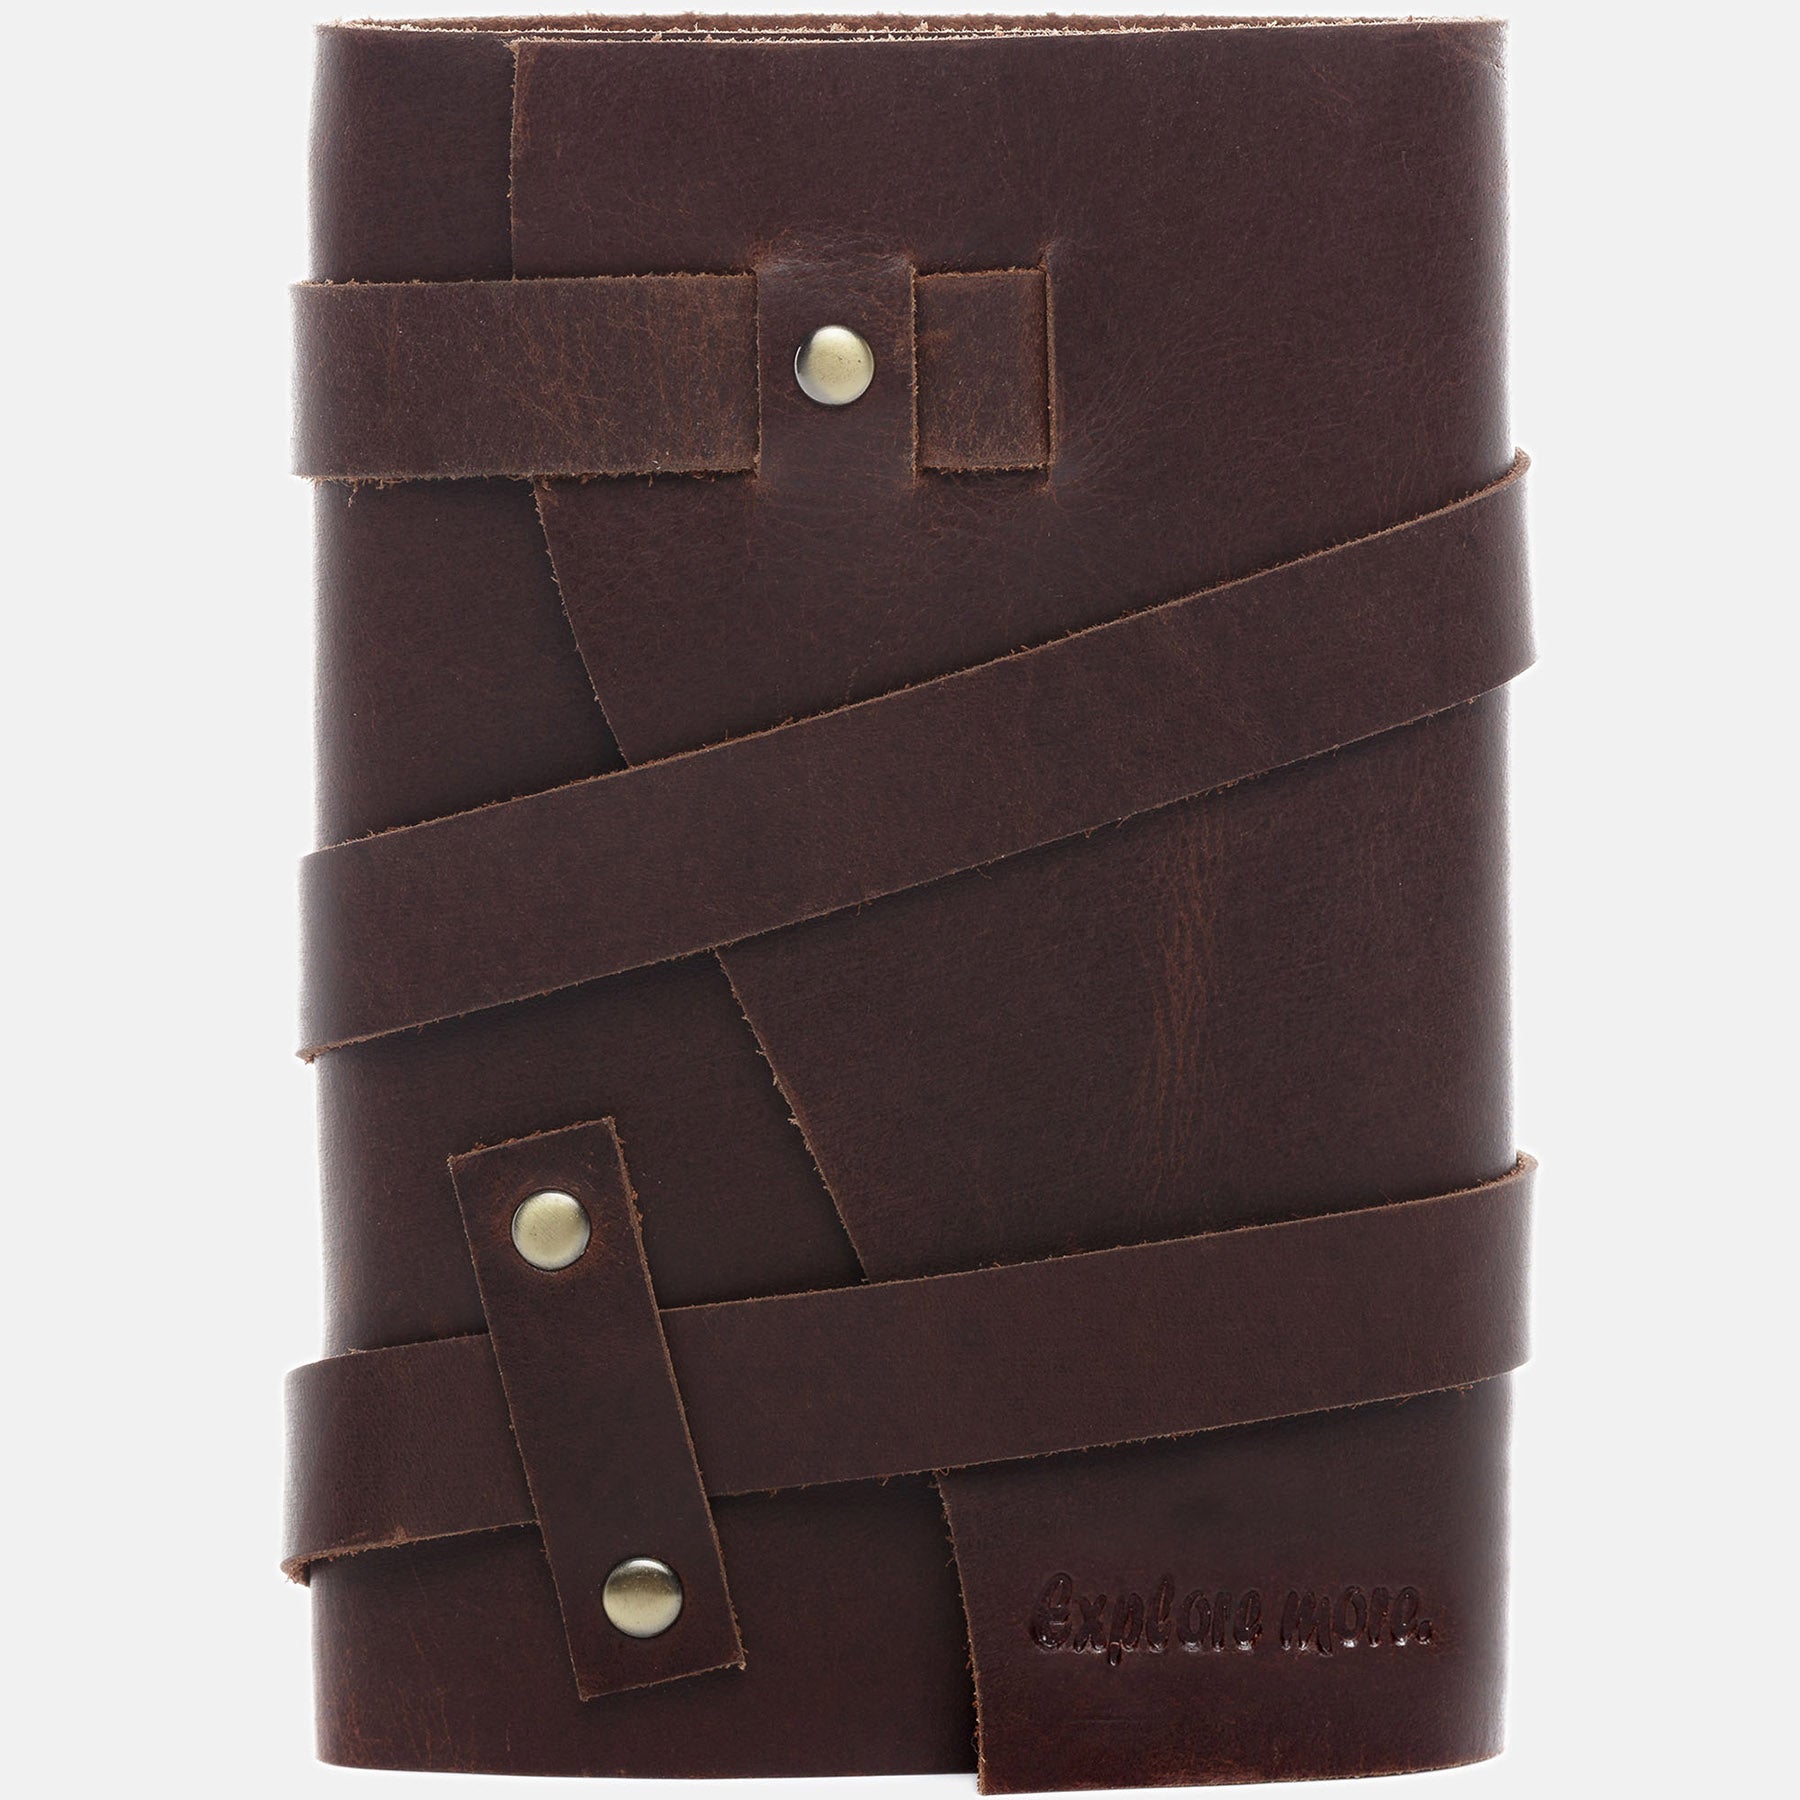 Notebook EXPLORE MORE natural leather brown-cognac